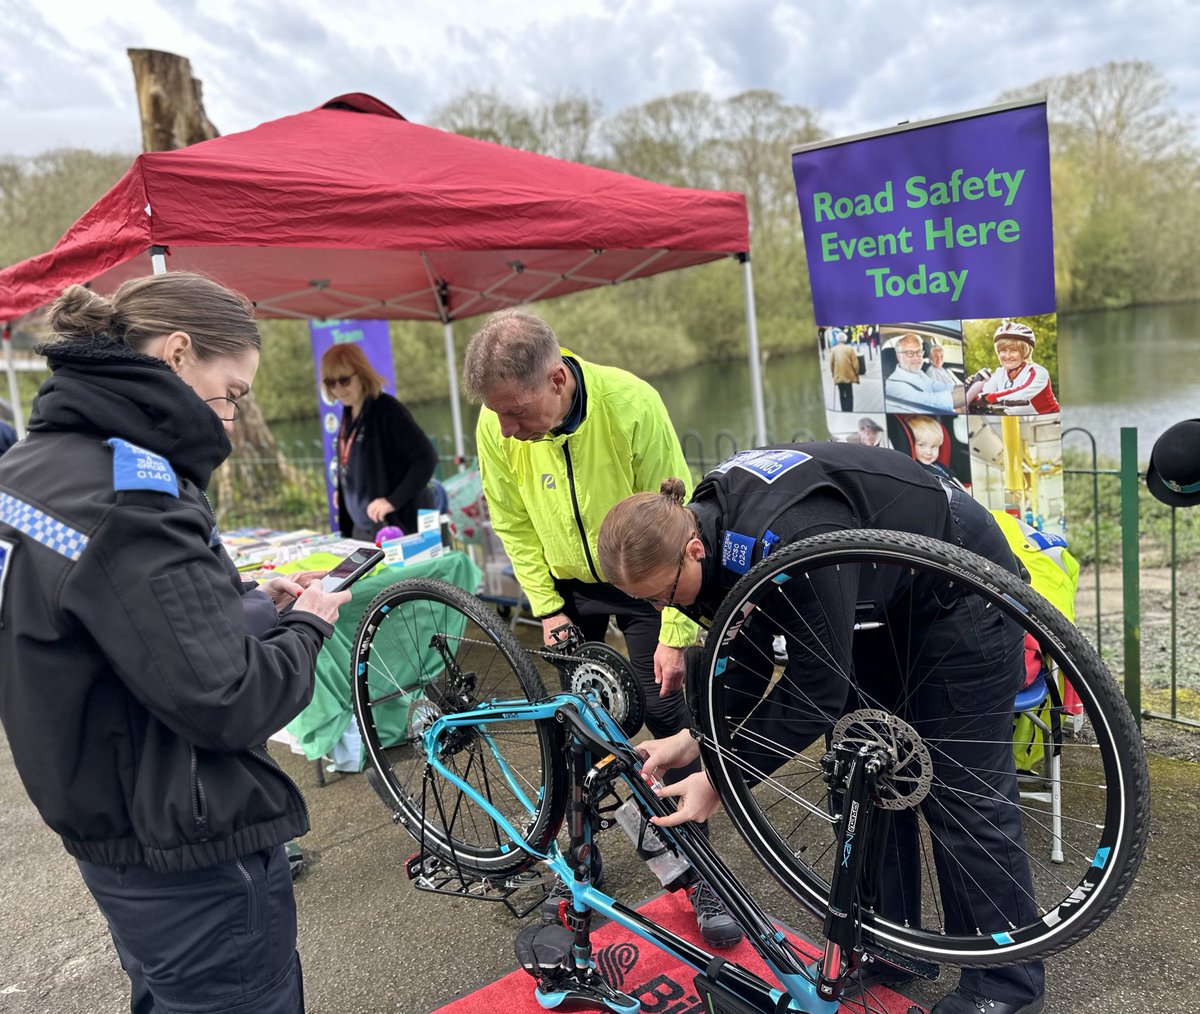 We’ve had great day so far at Taylor Park for our walking and cycling event. Come say hi before 3pm! The event was organised by our road safety team, in conjunction with St Helens Wellbeing, @MerseyPolice, @StHelensCycling, @BikeRightUK & St.Helens bike doctor.